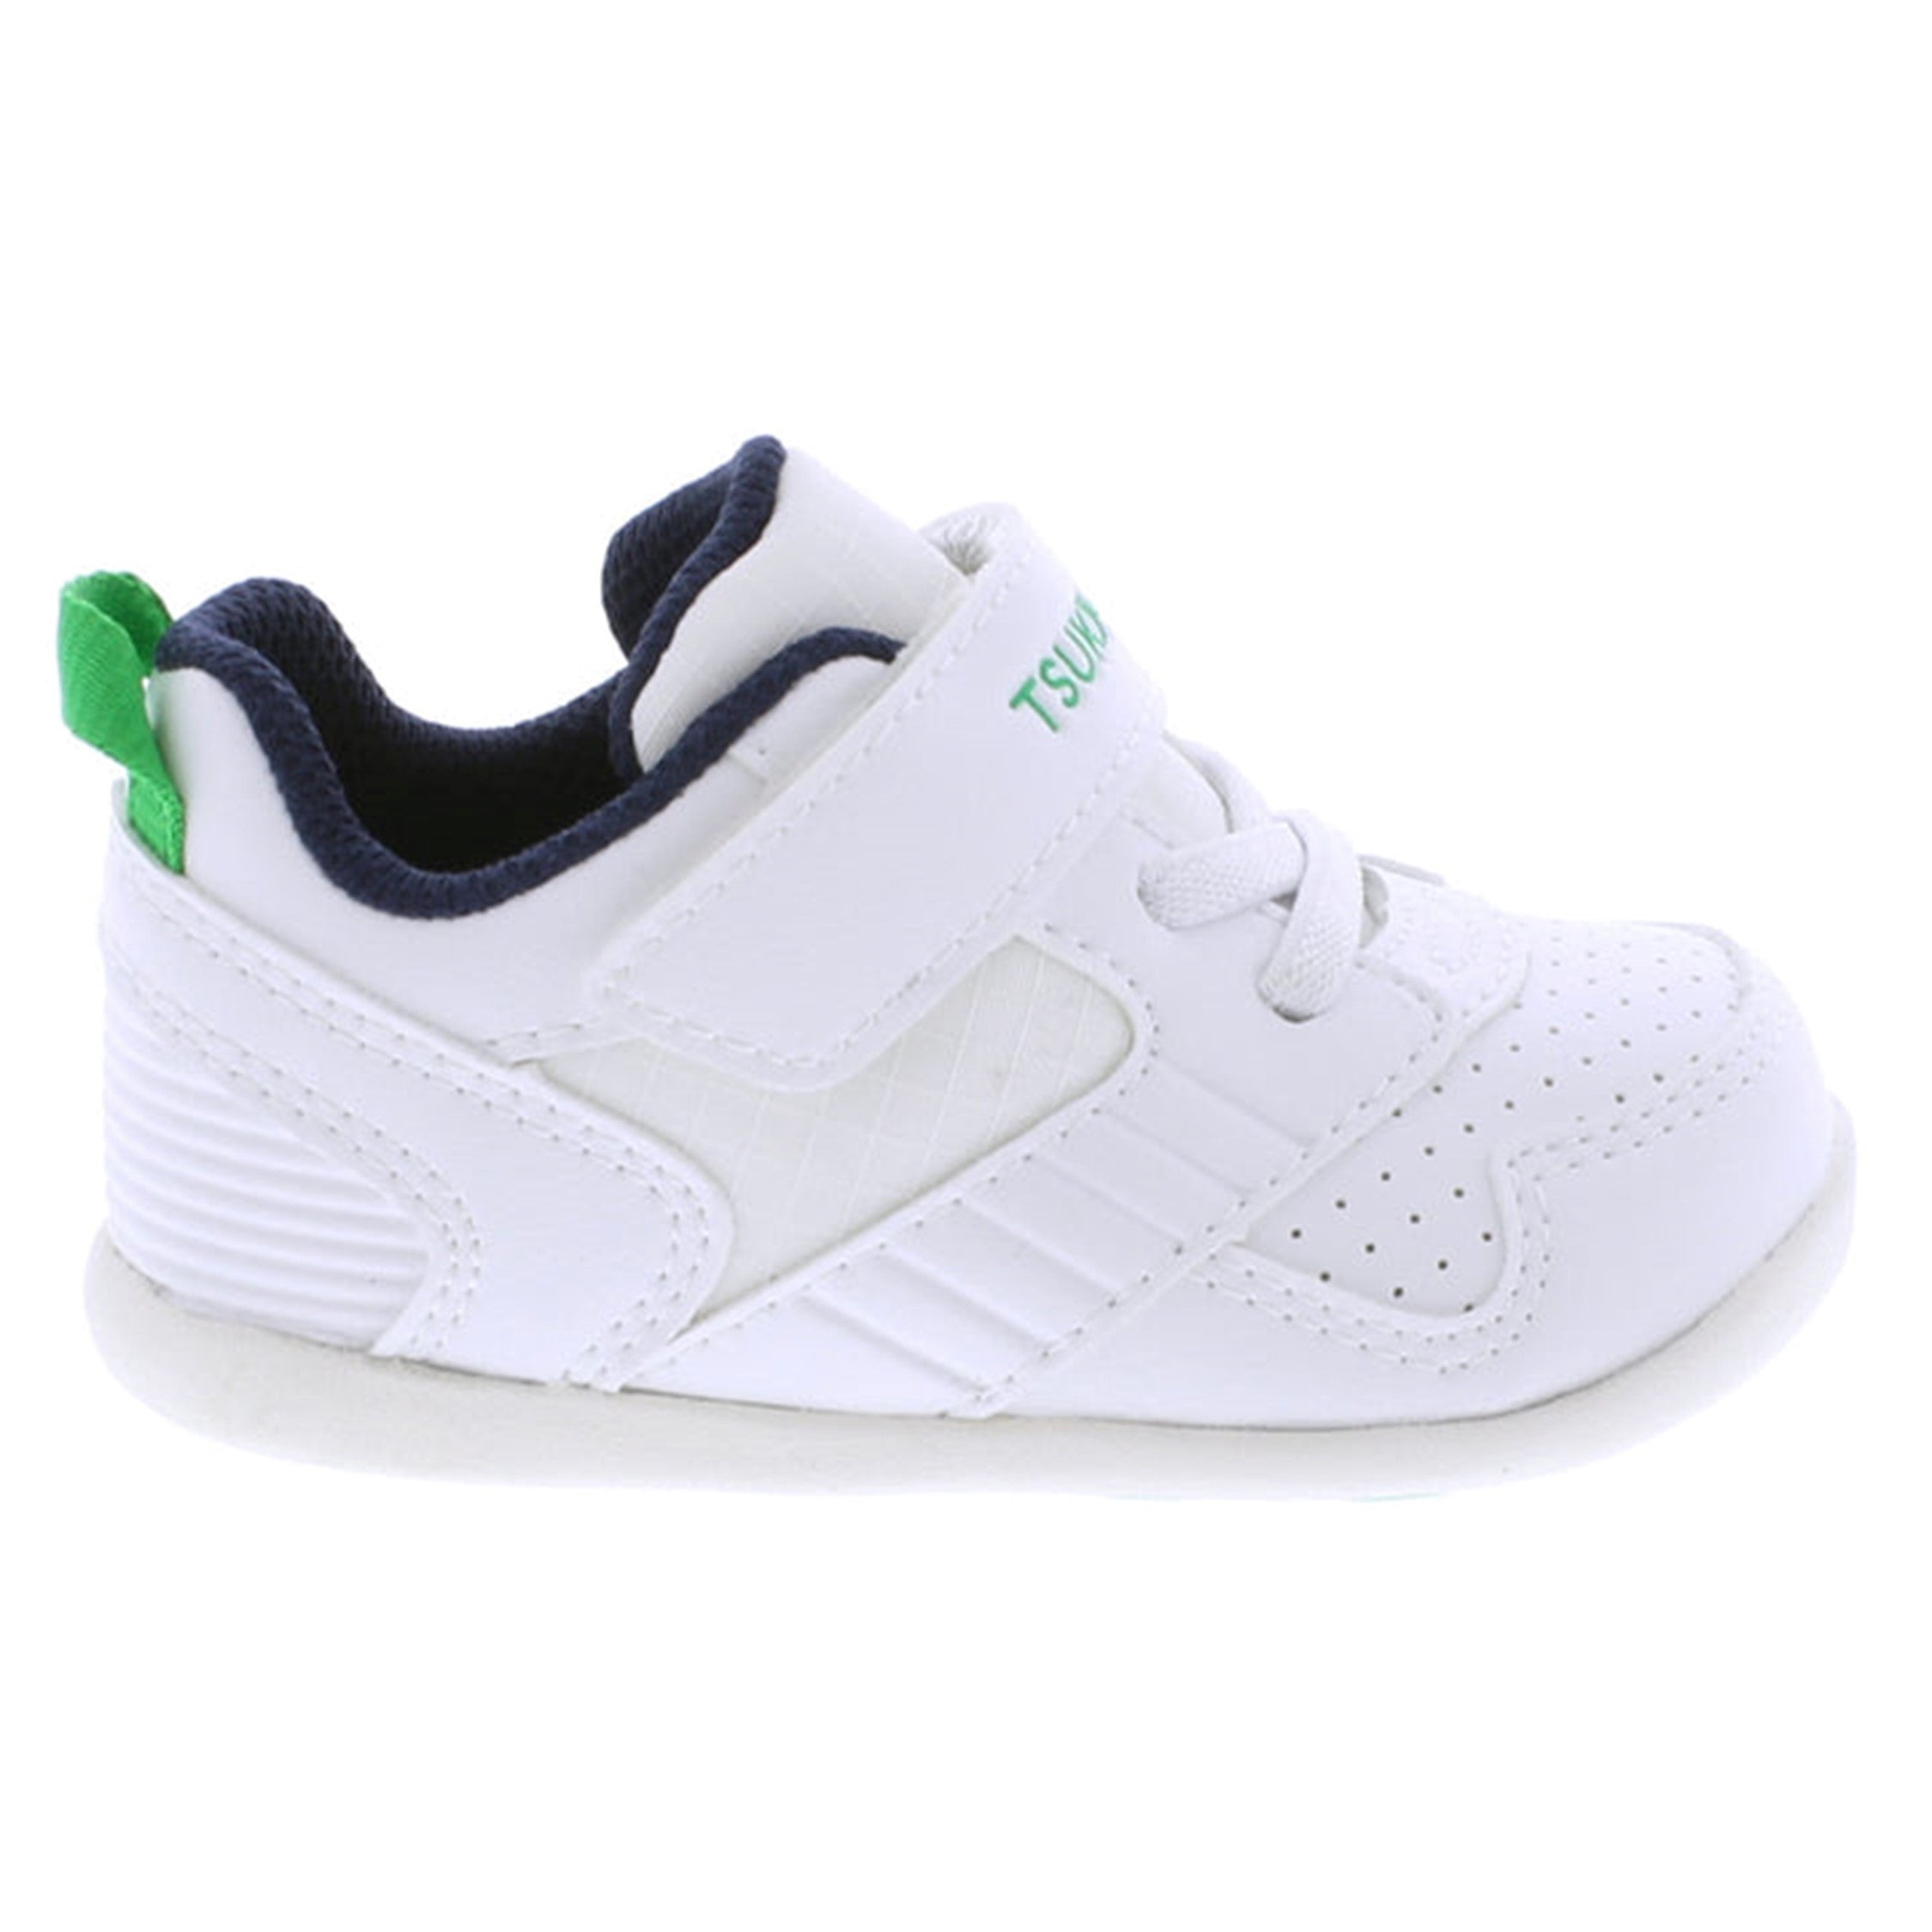 Racer Baby Athletic Trainer - White/Green